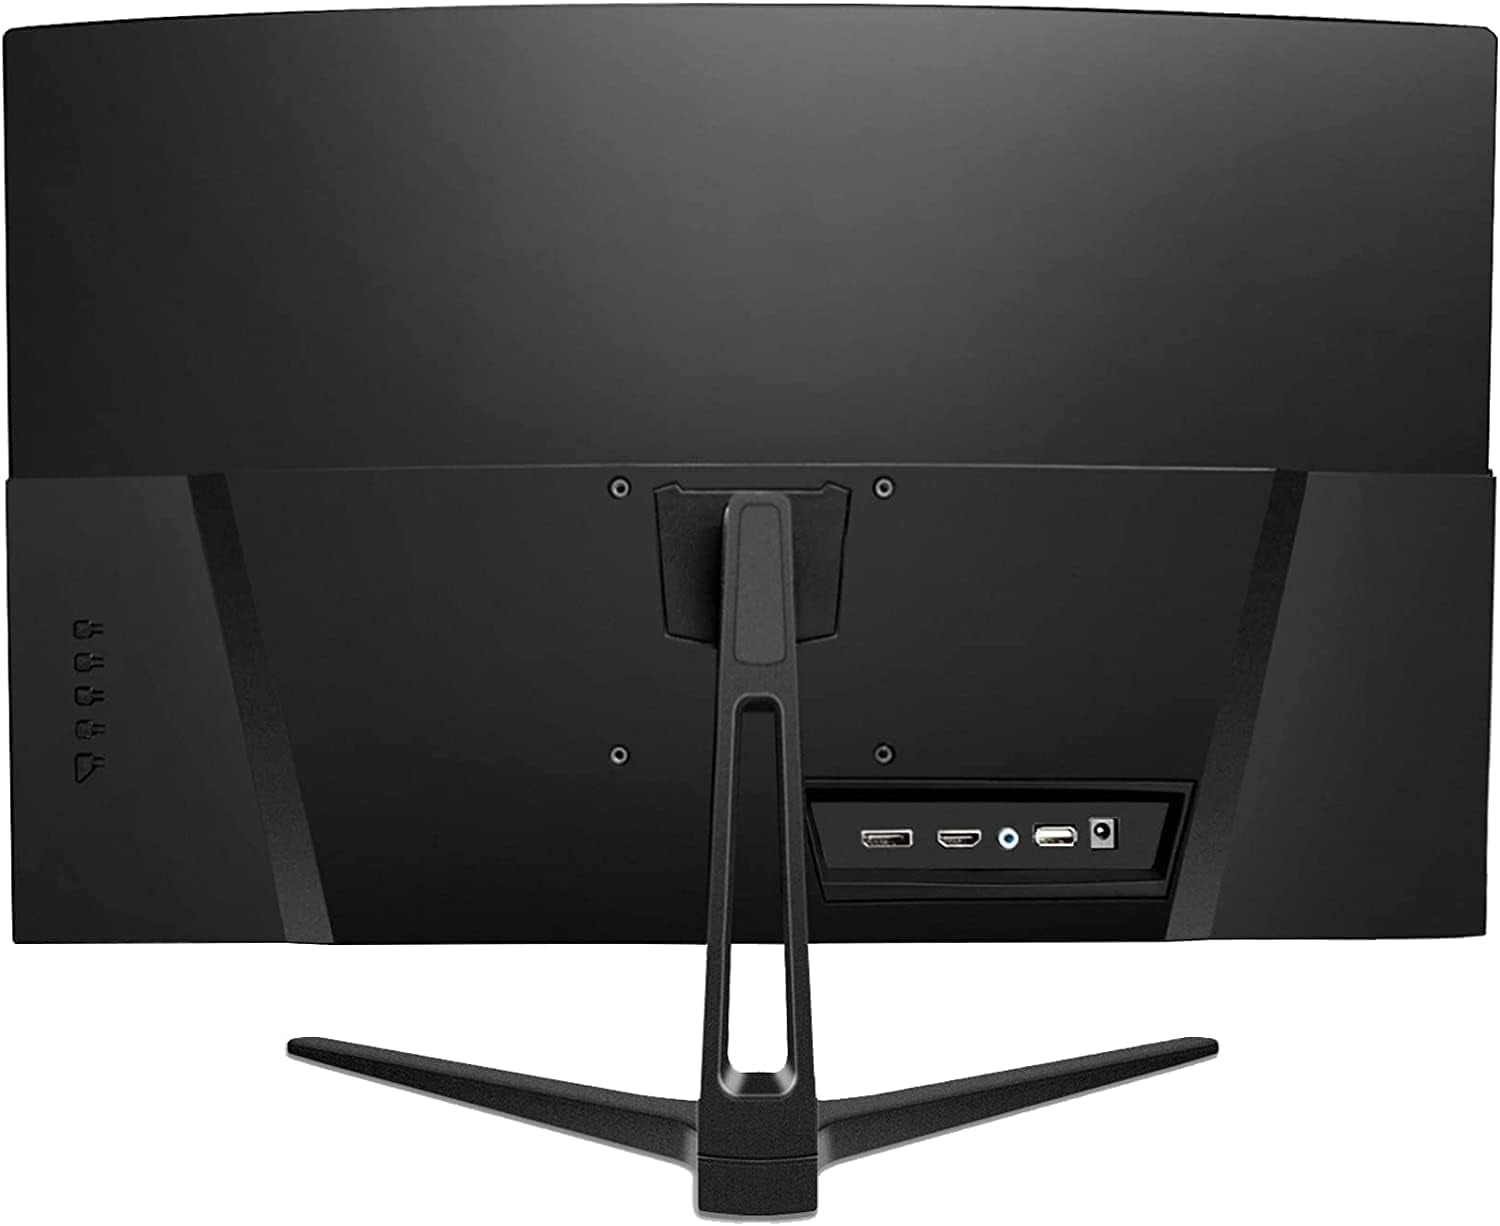 27 Inch 180HZ Curved Gaming Monitor, Full HD 1080P 1800R Frameless Computer Monitor, 1Ms GTG with Freesync, Low Motion Blur, Eye Care, VESA, Displayport, HDMI, Black